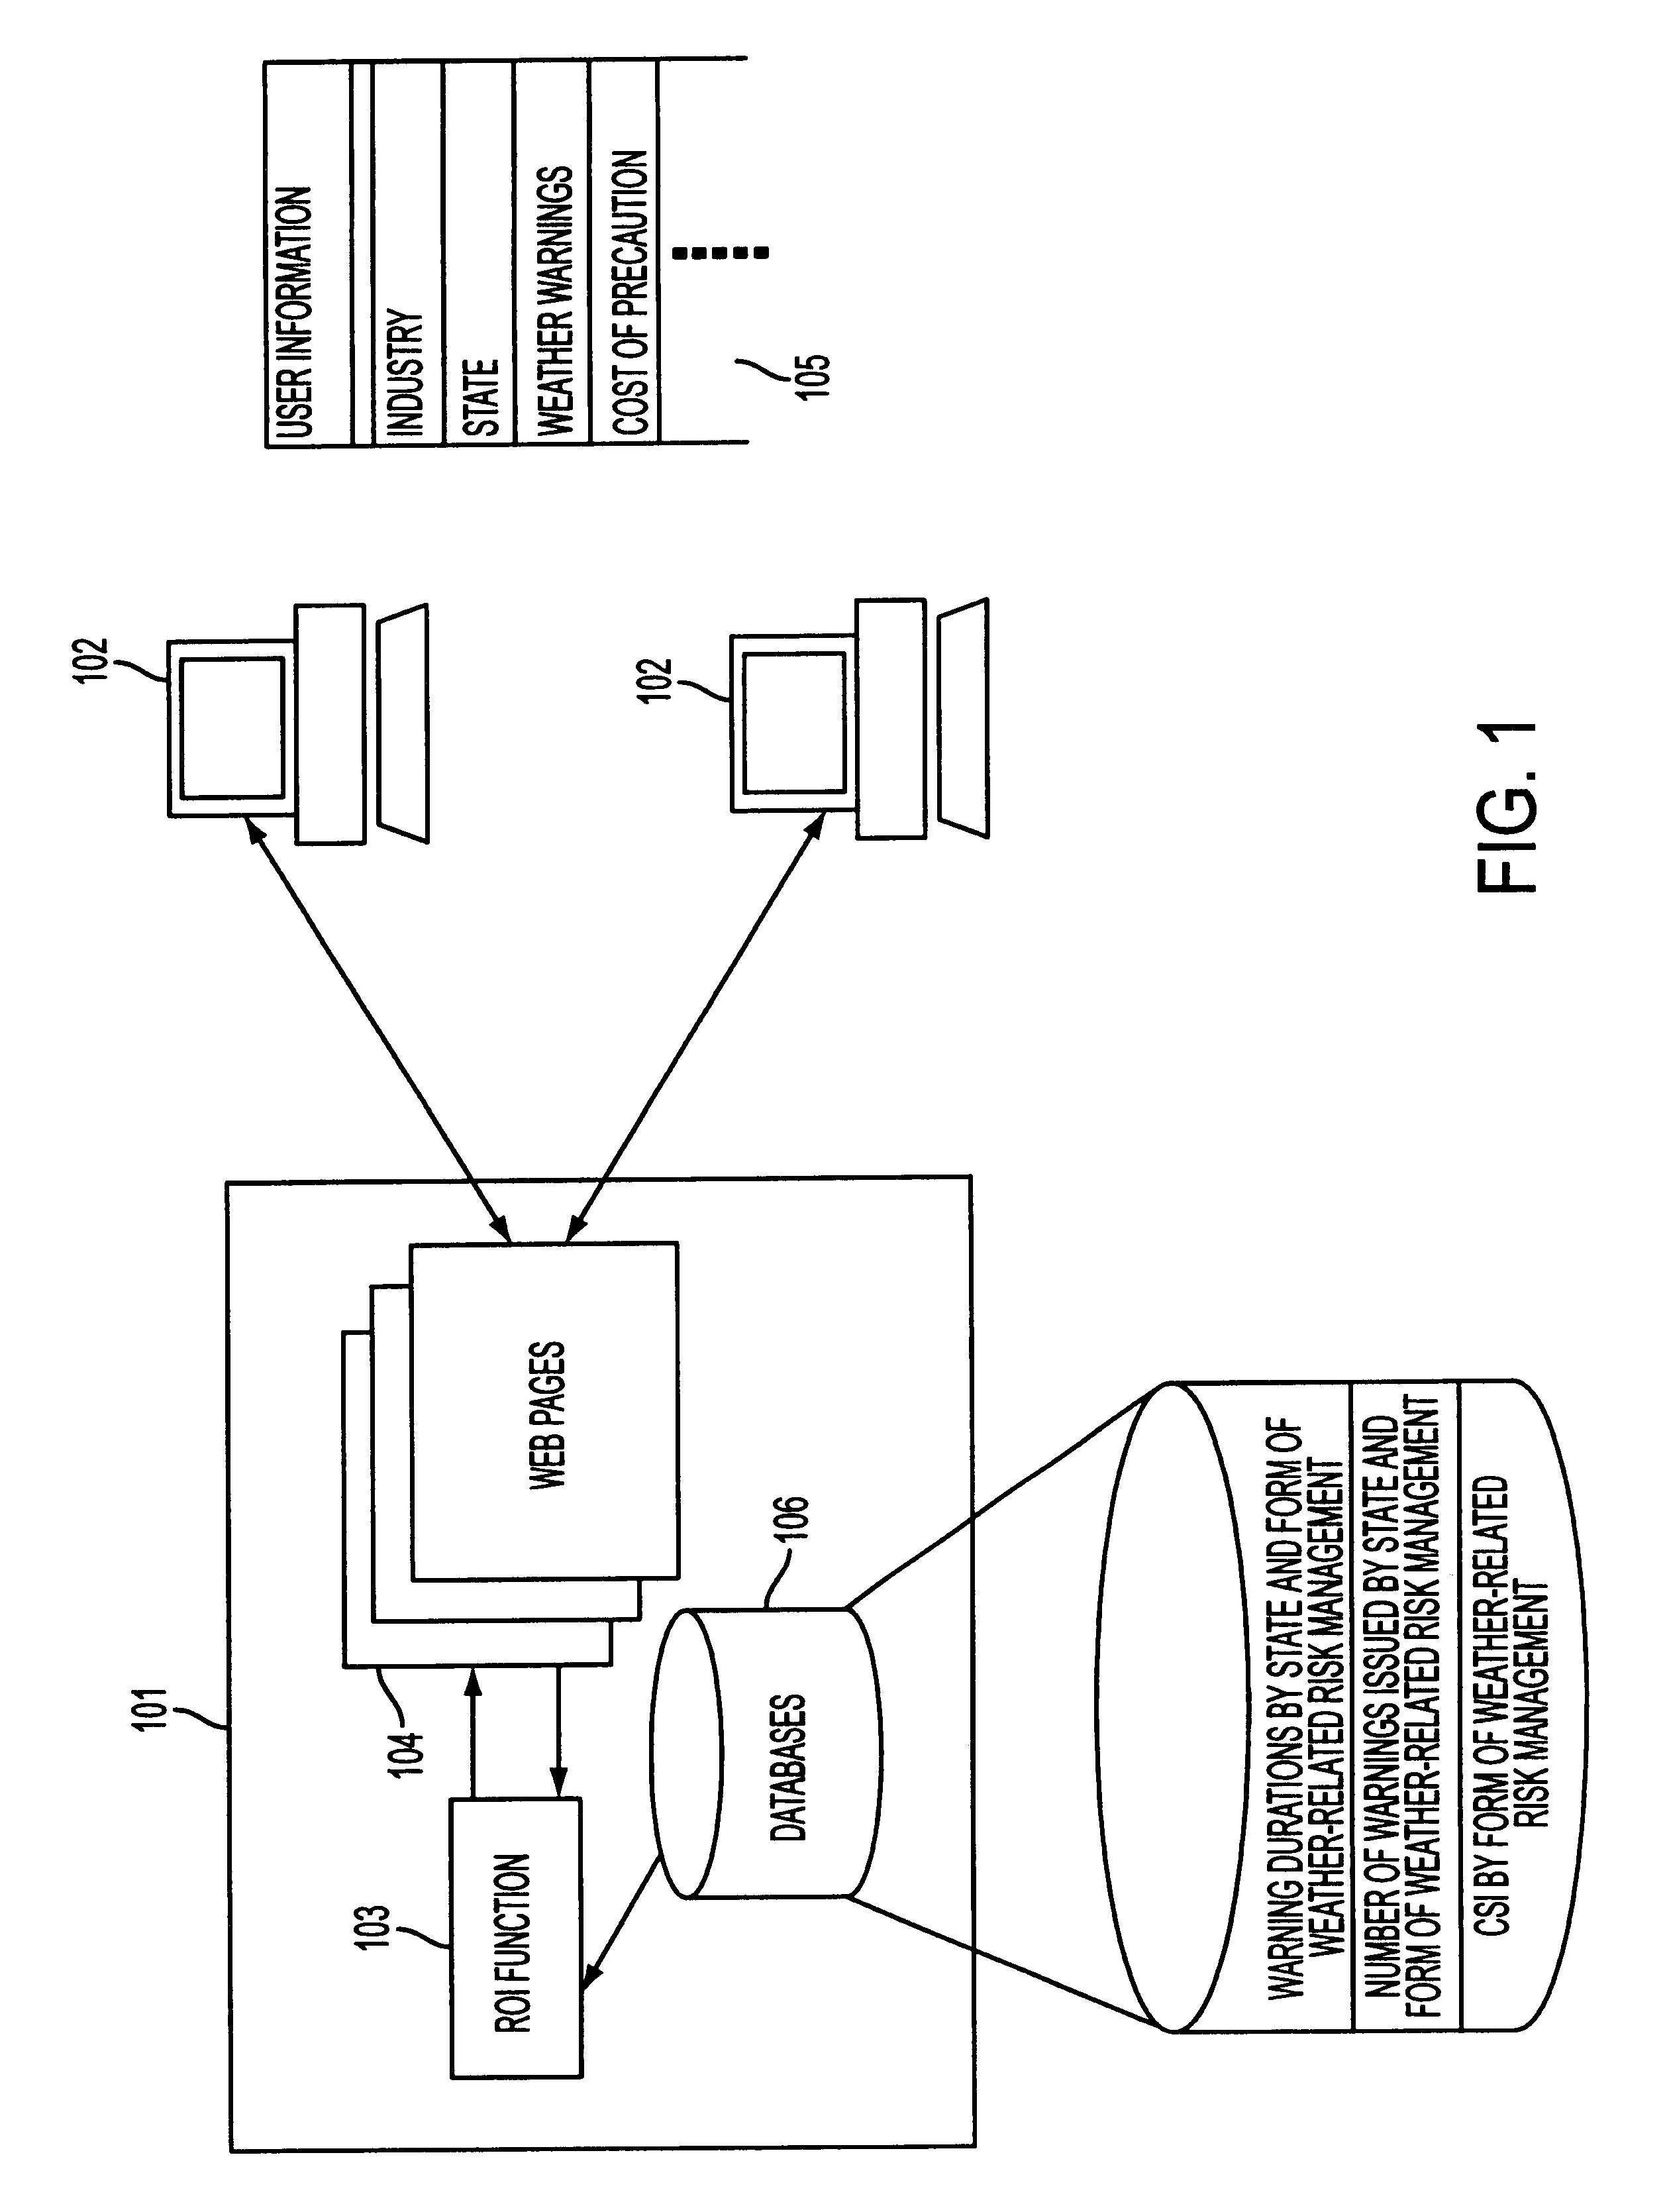 Method and apparatus for calculating a return on investment for weather-related risk management